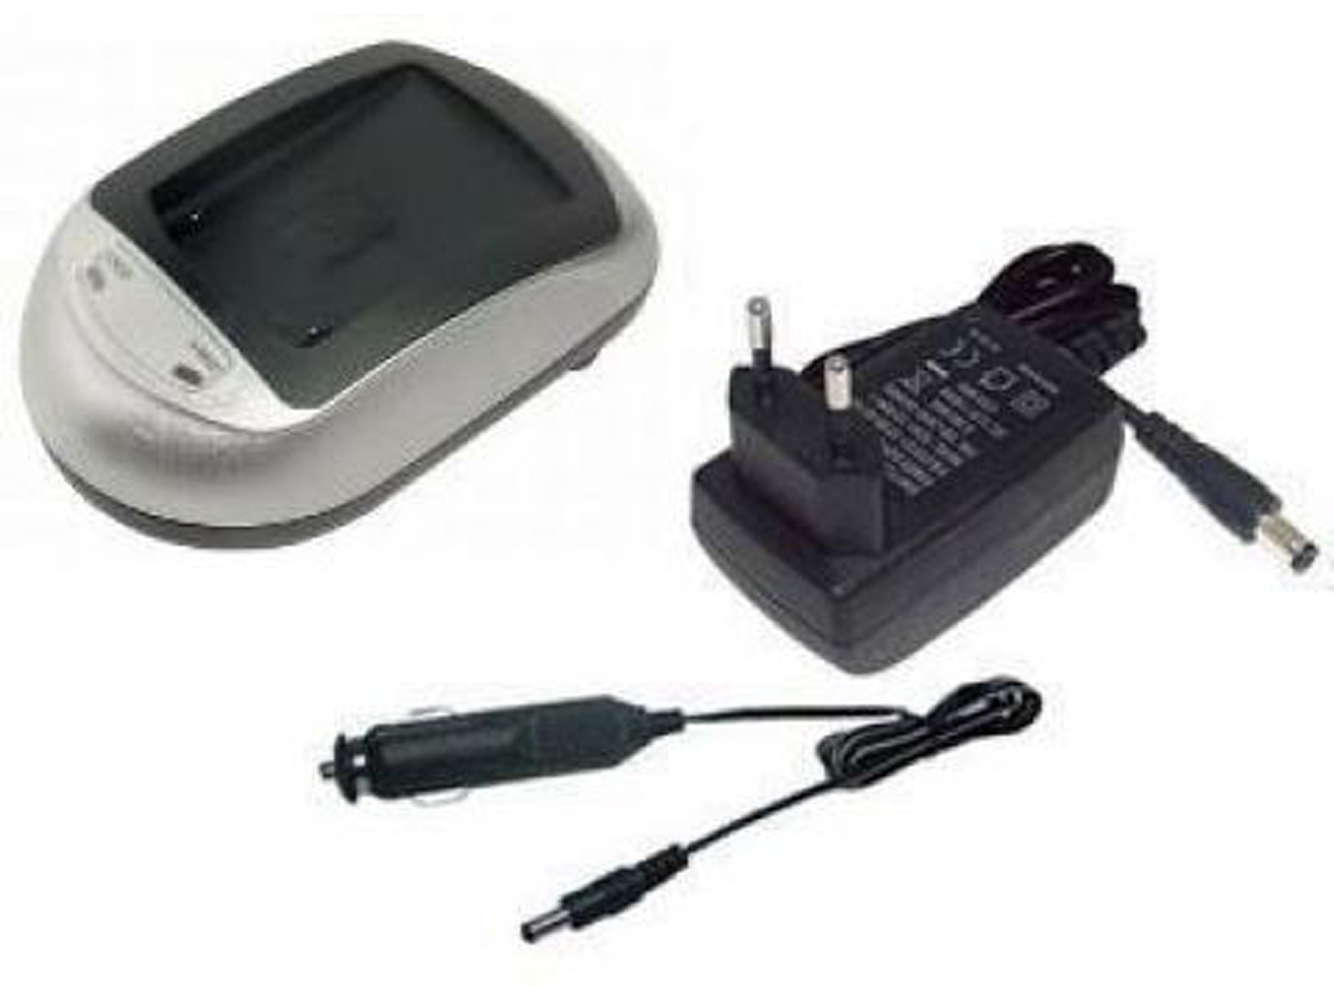 Samsung Sb-l110g, Sb-l70g Battery Chargers For Samsung Scd5000, Samsung Vm-c5000 replacement